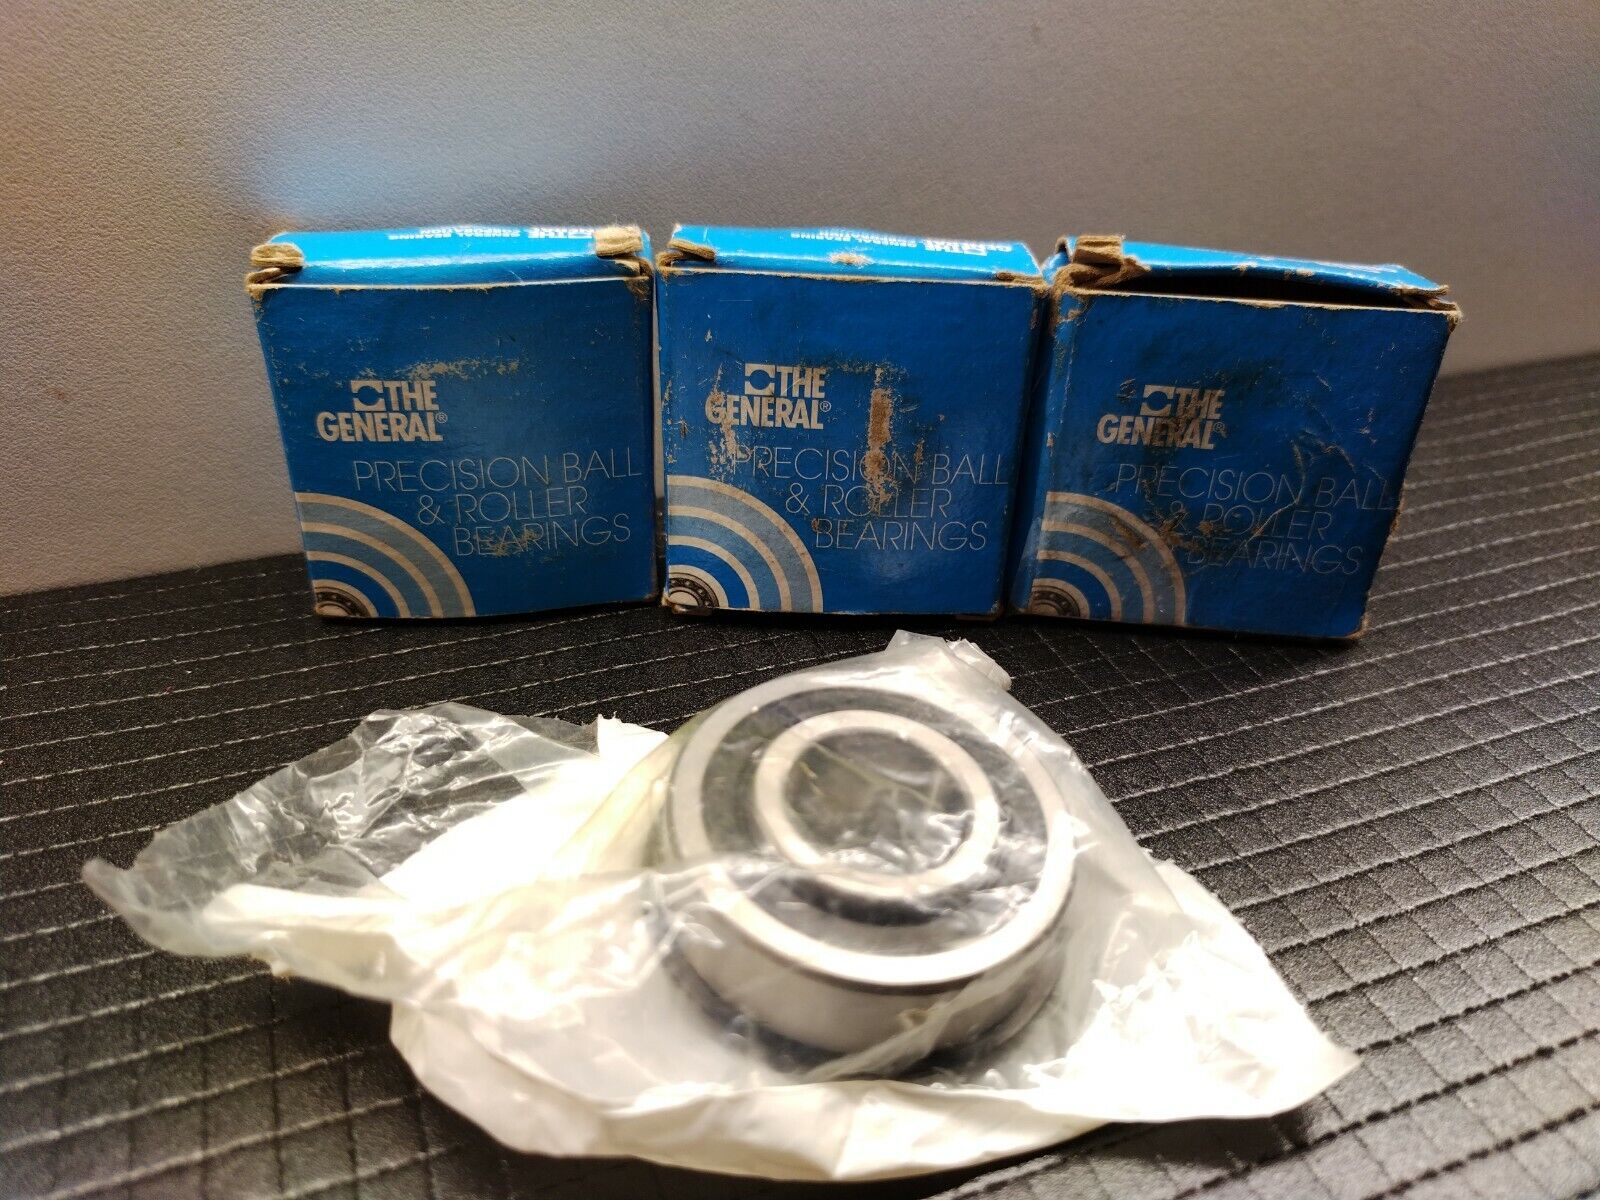 LOT OF 3.  THE GENERAL S8603-88-300  PRECISION BALL & ROLLER BEARINGS 7512DLG